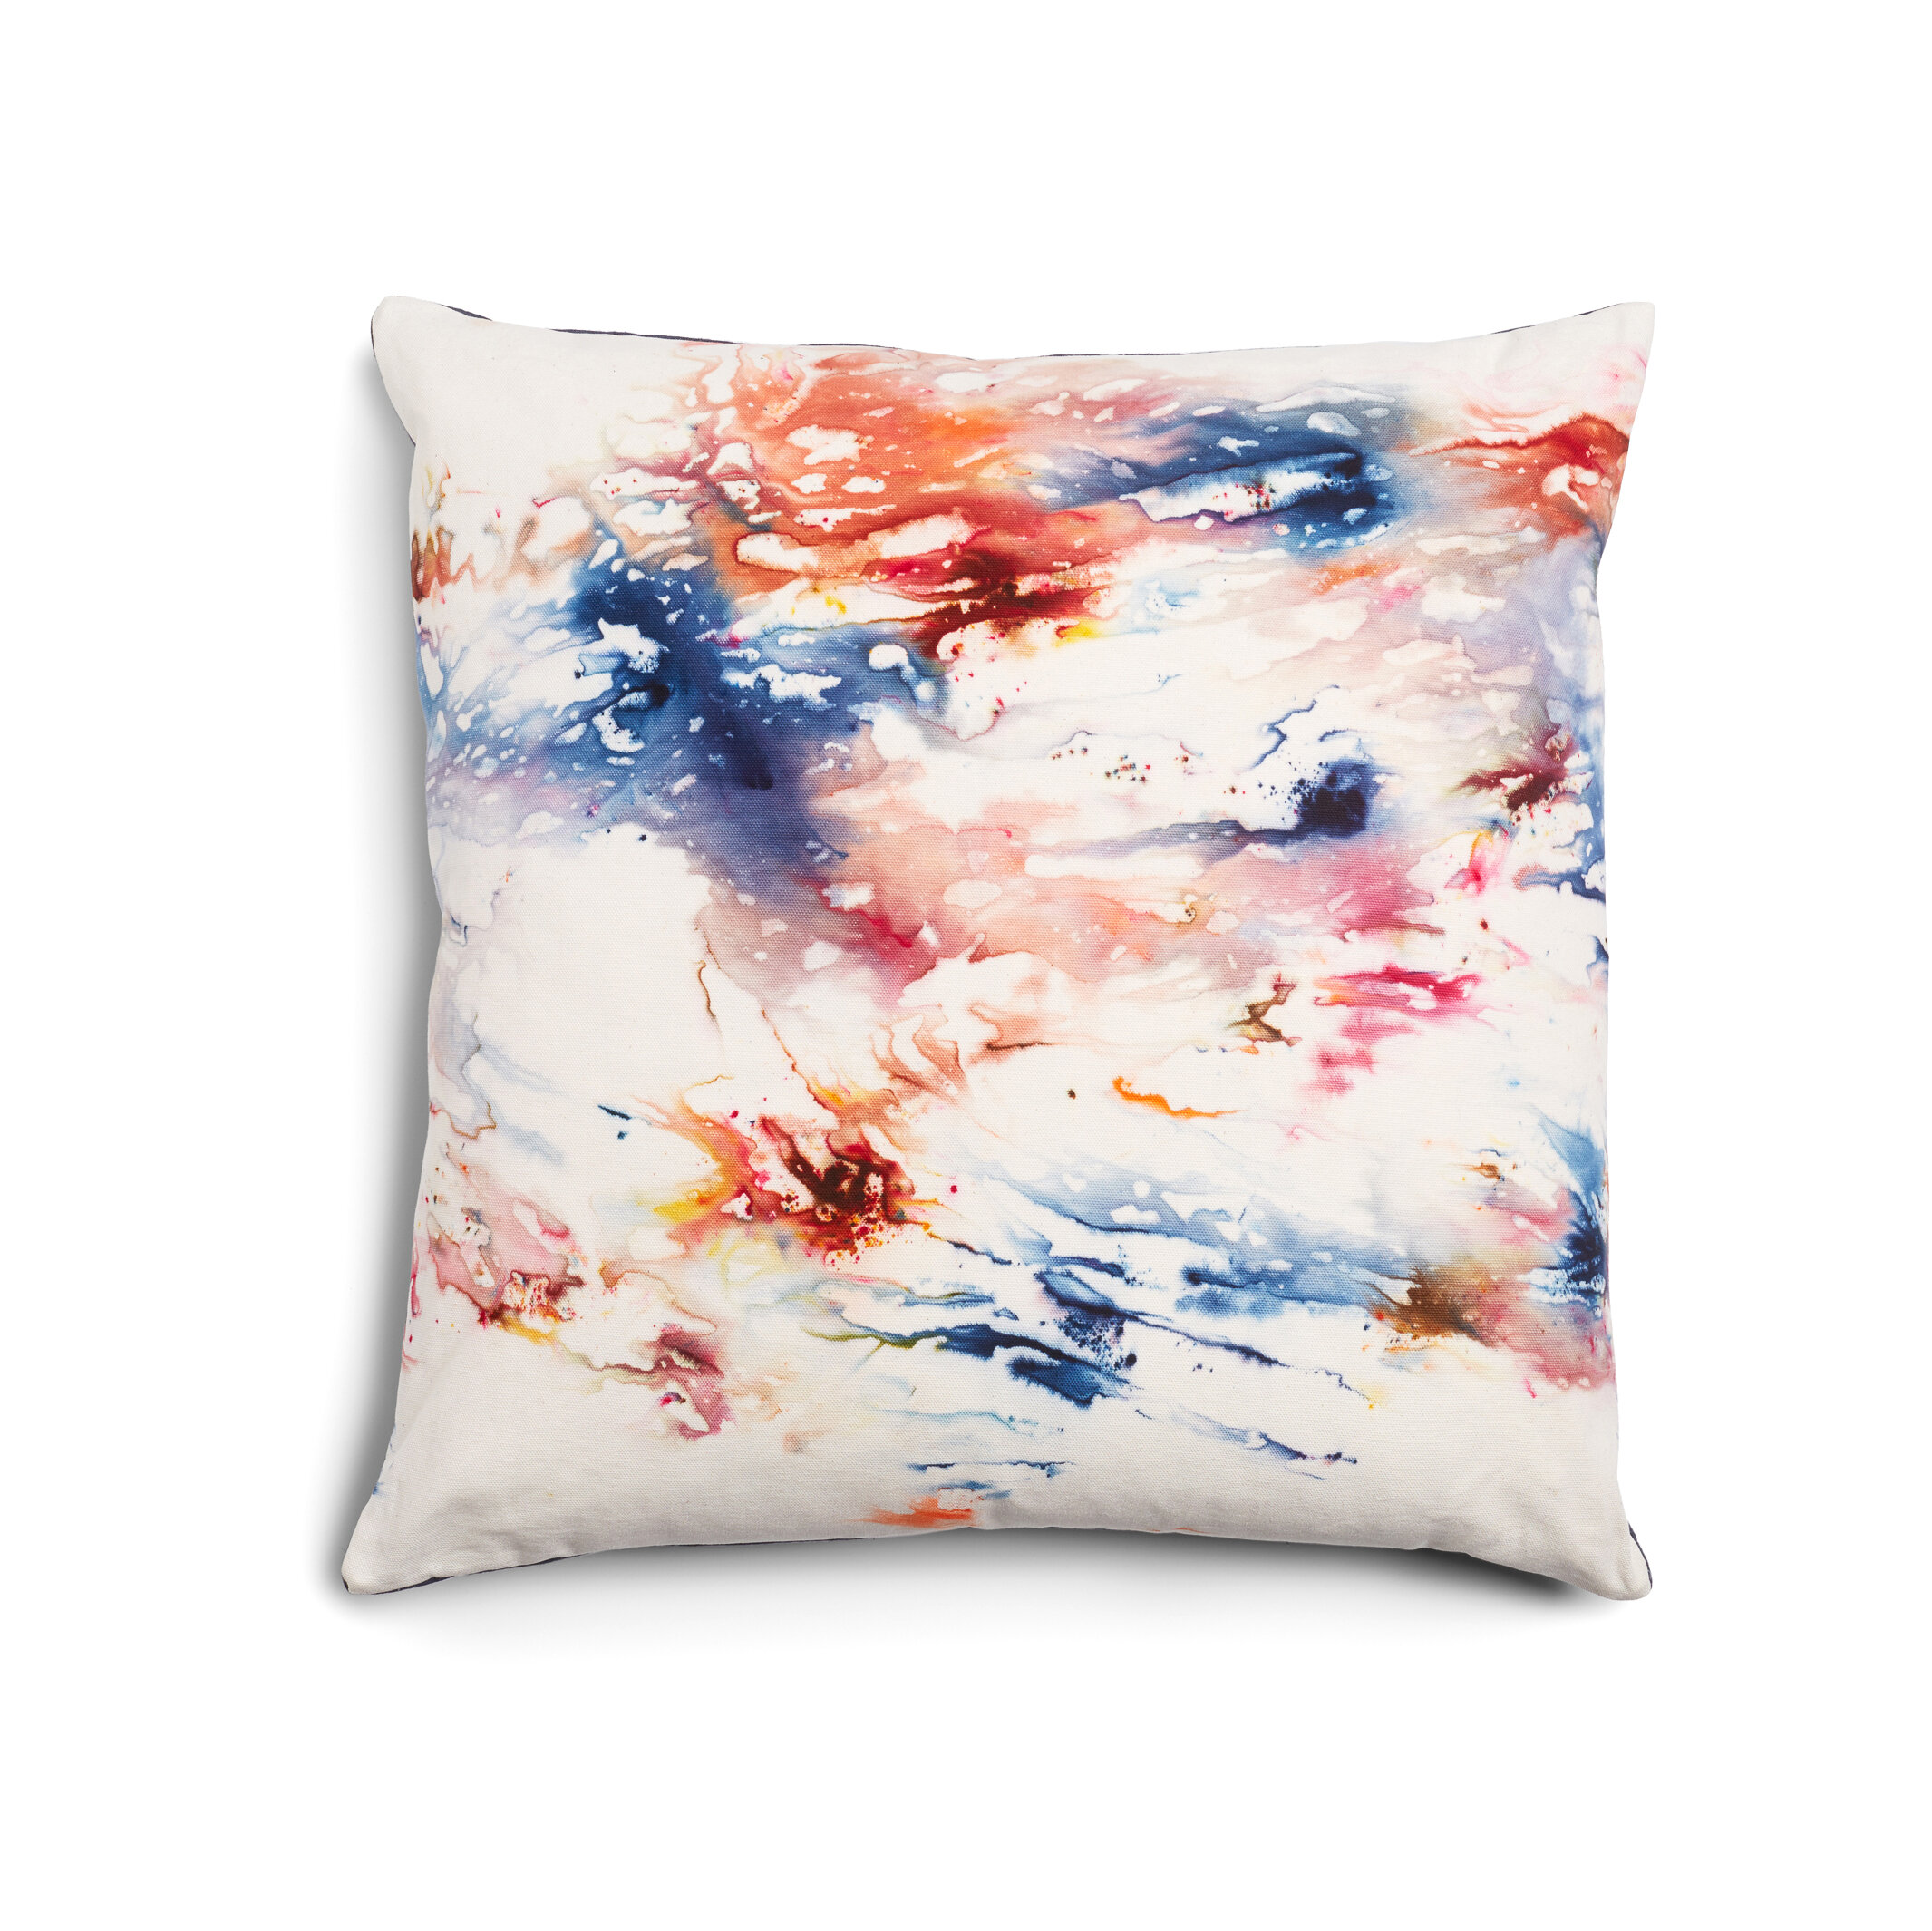 on-white-pillow-art-product-photo-example.JPG